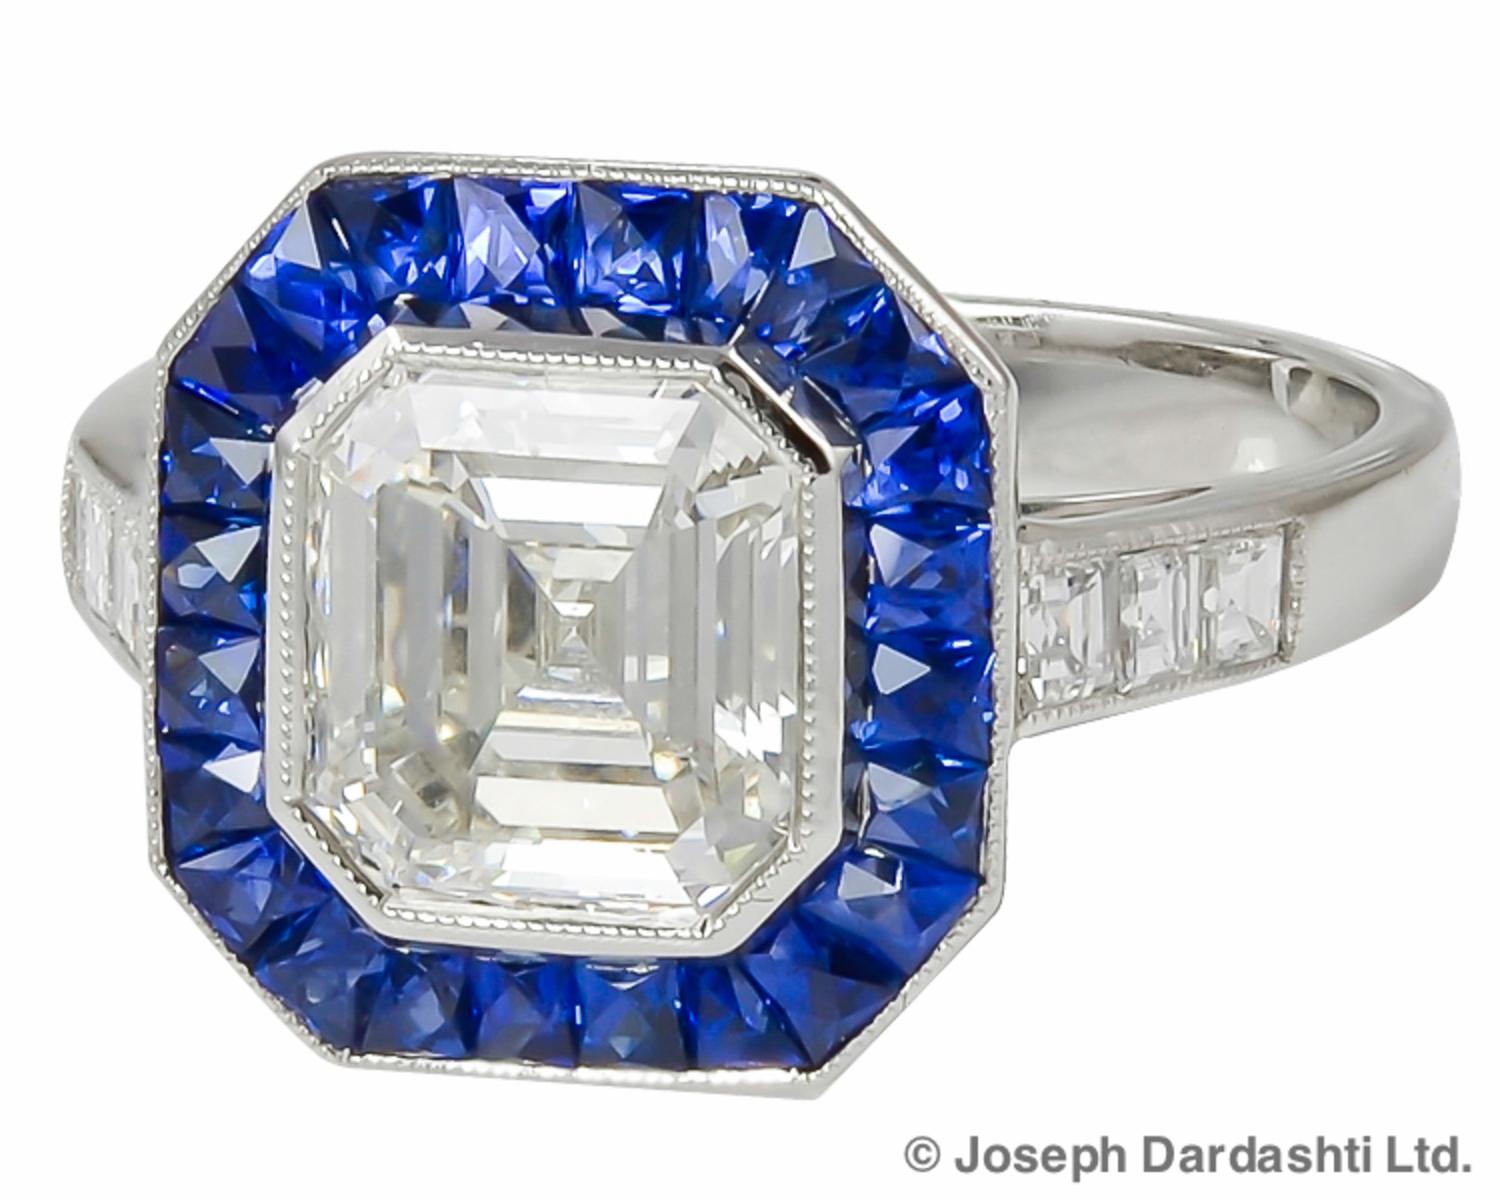 Sophia D GIA certified platinum ring features a 3.37 carat center square cut diamond with a color and clarity of K-VVS1 surrounded with blue sapphire weighing 1.20 carats and diamonds weighing 0.28 carats ring. Ring is available for